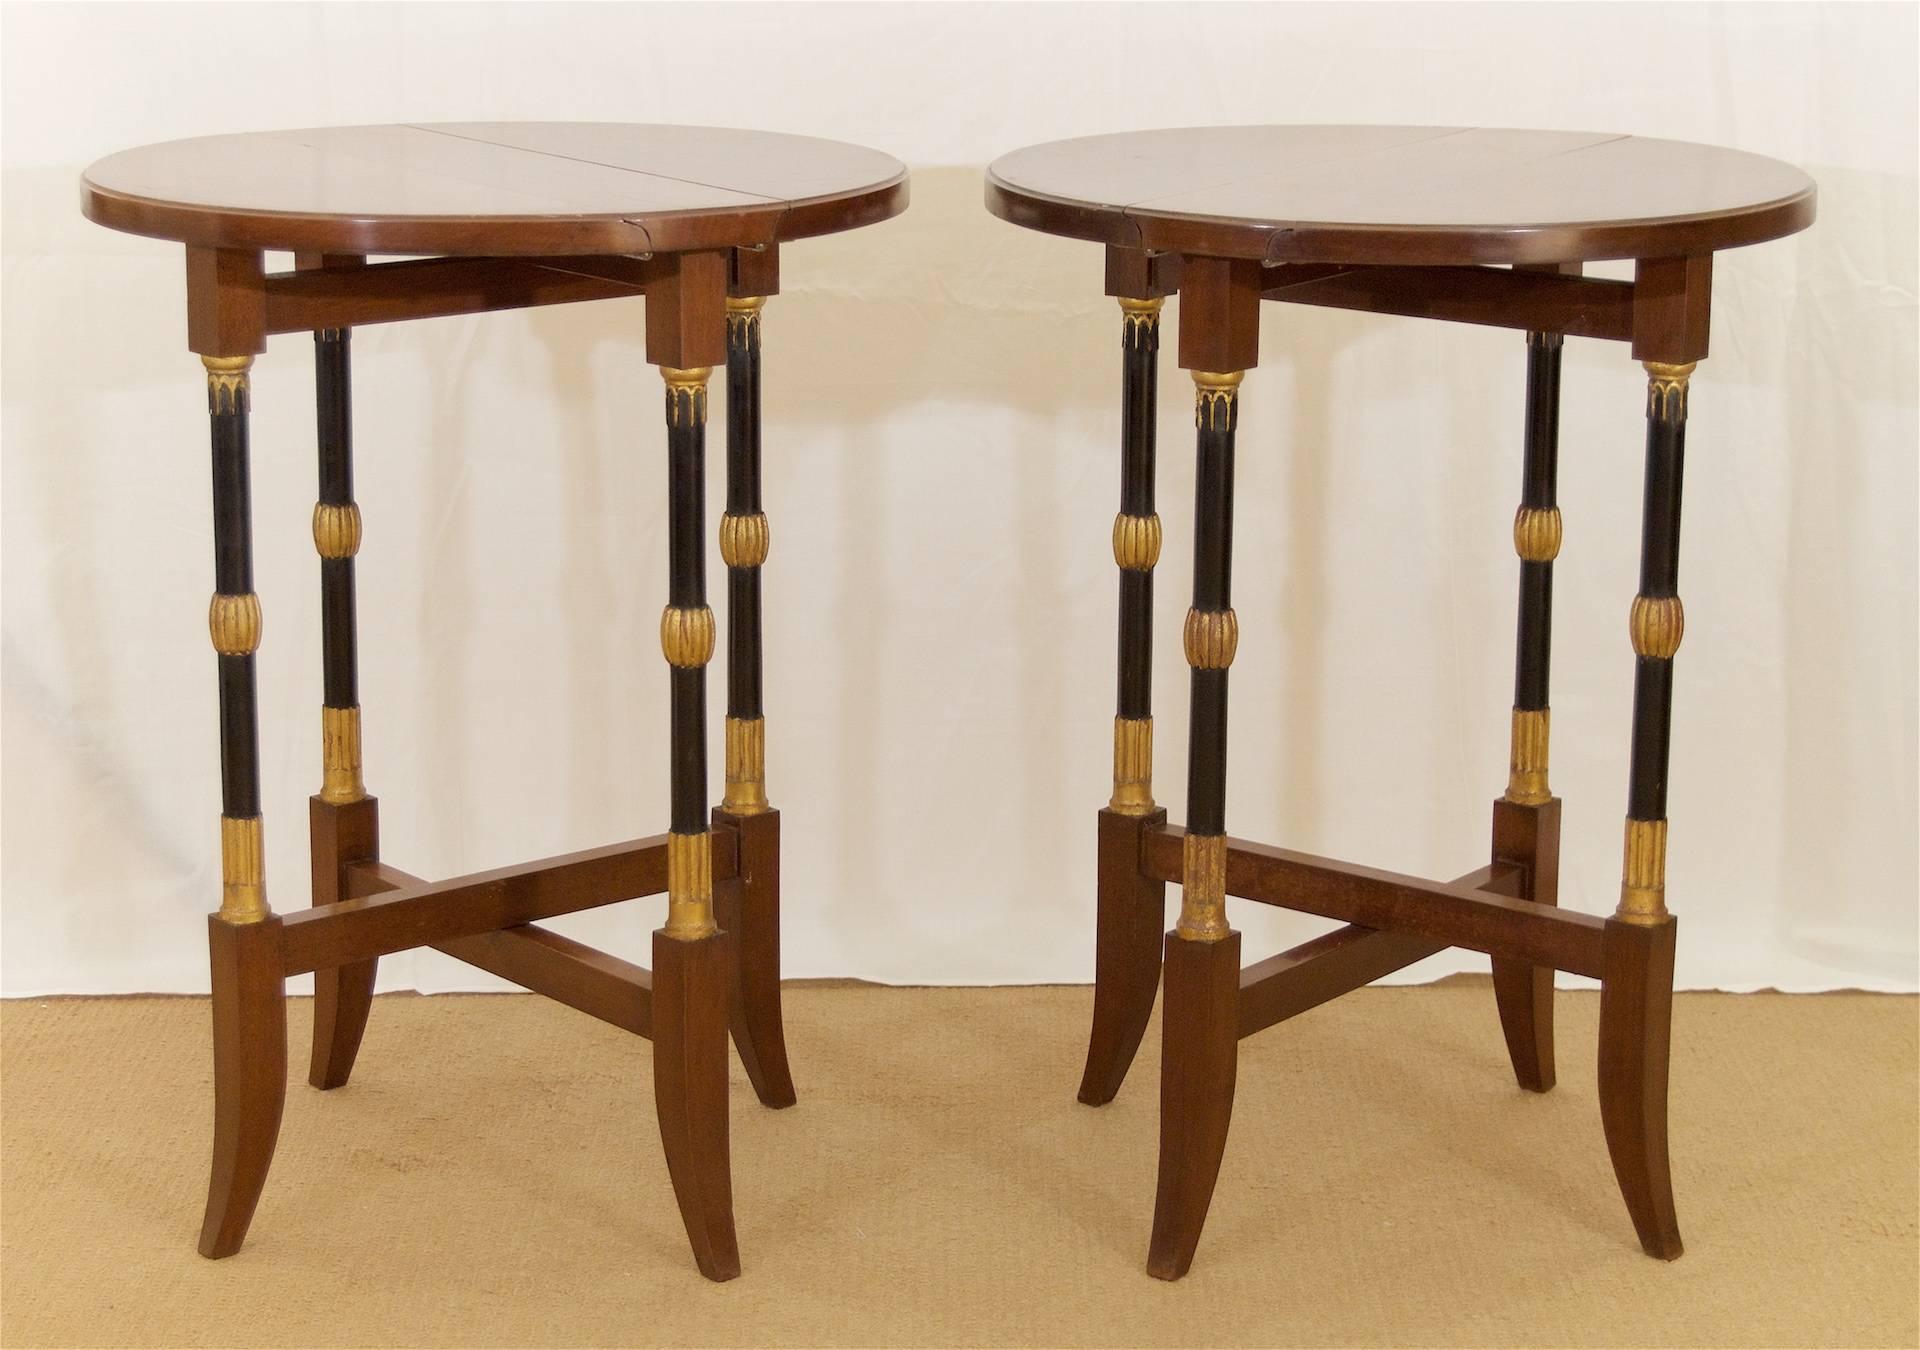 American Regency-Style Folding Occasional Tables from the Fontainebleau For Sale